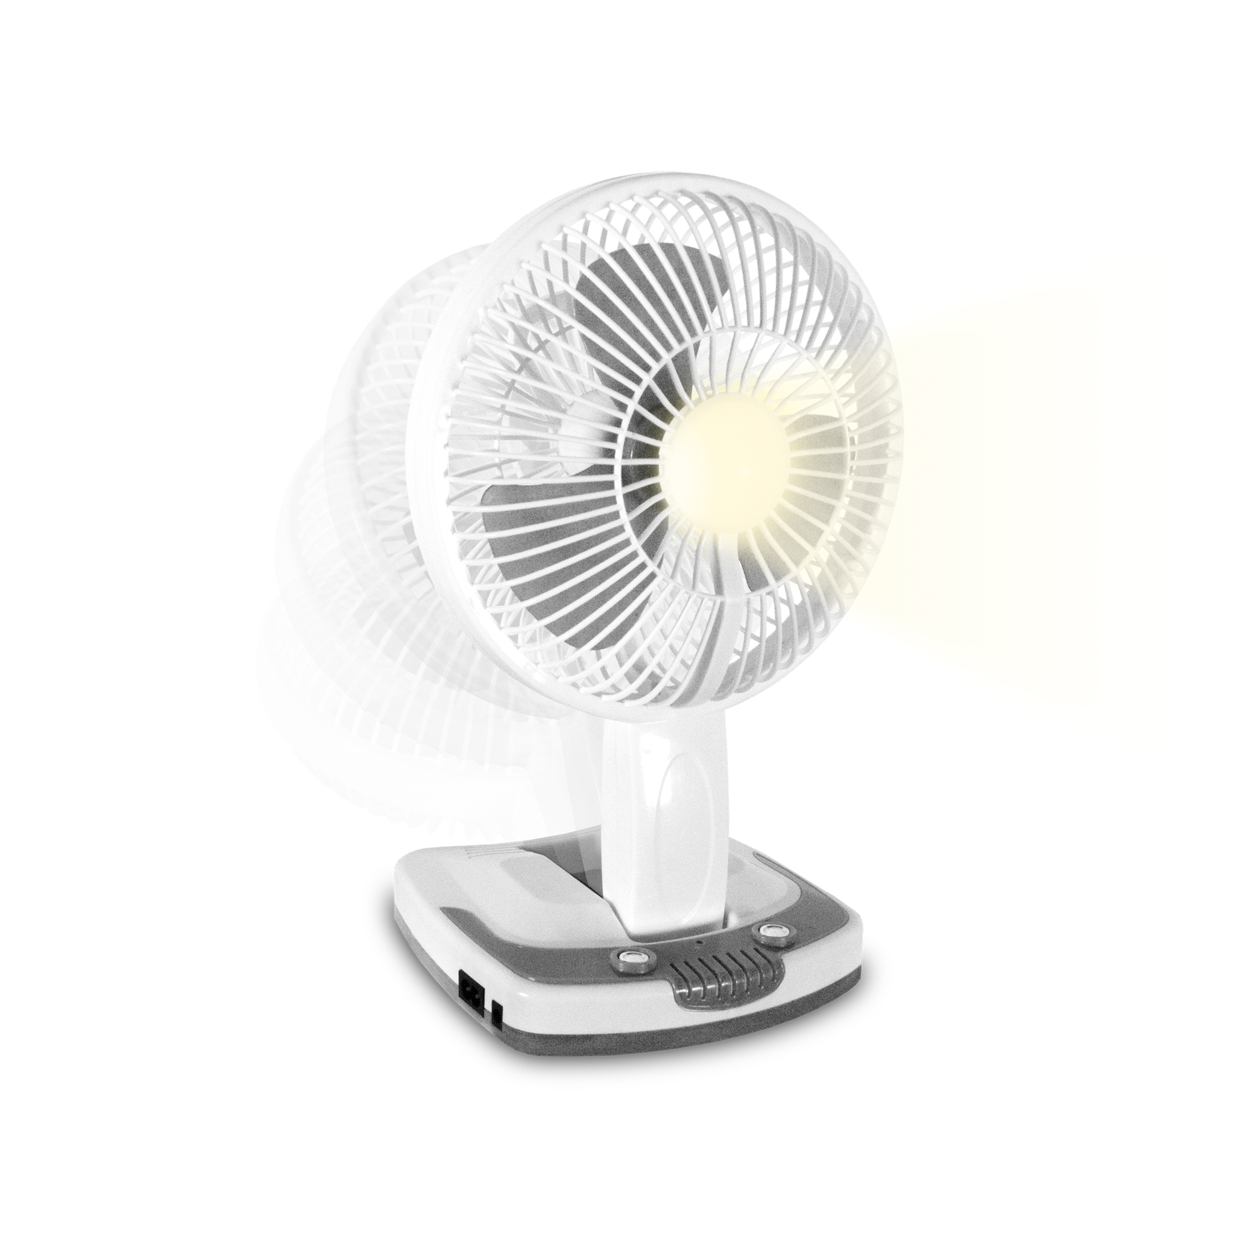 Technical Pro Adventure Series Rechargeable Desk/Wall Fan With LED Work Lamp & Built-in Powerbank W/ USB Output, Adjustable Tilt